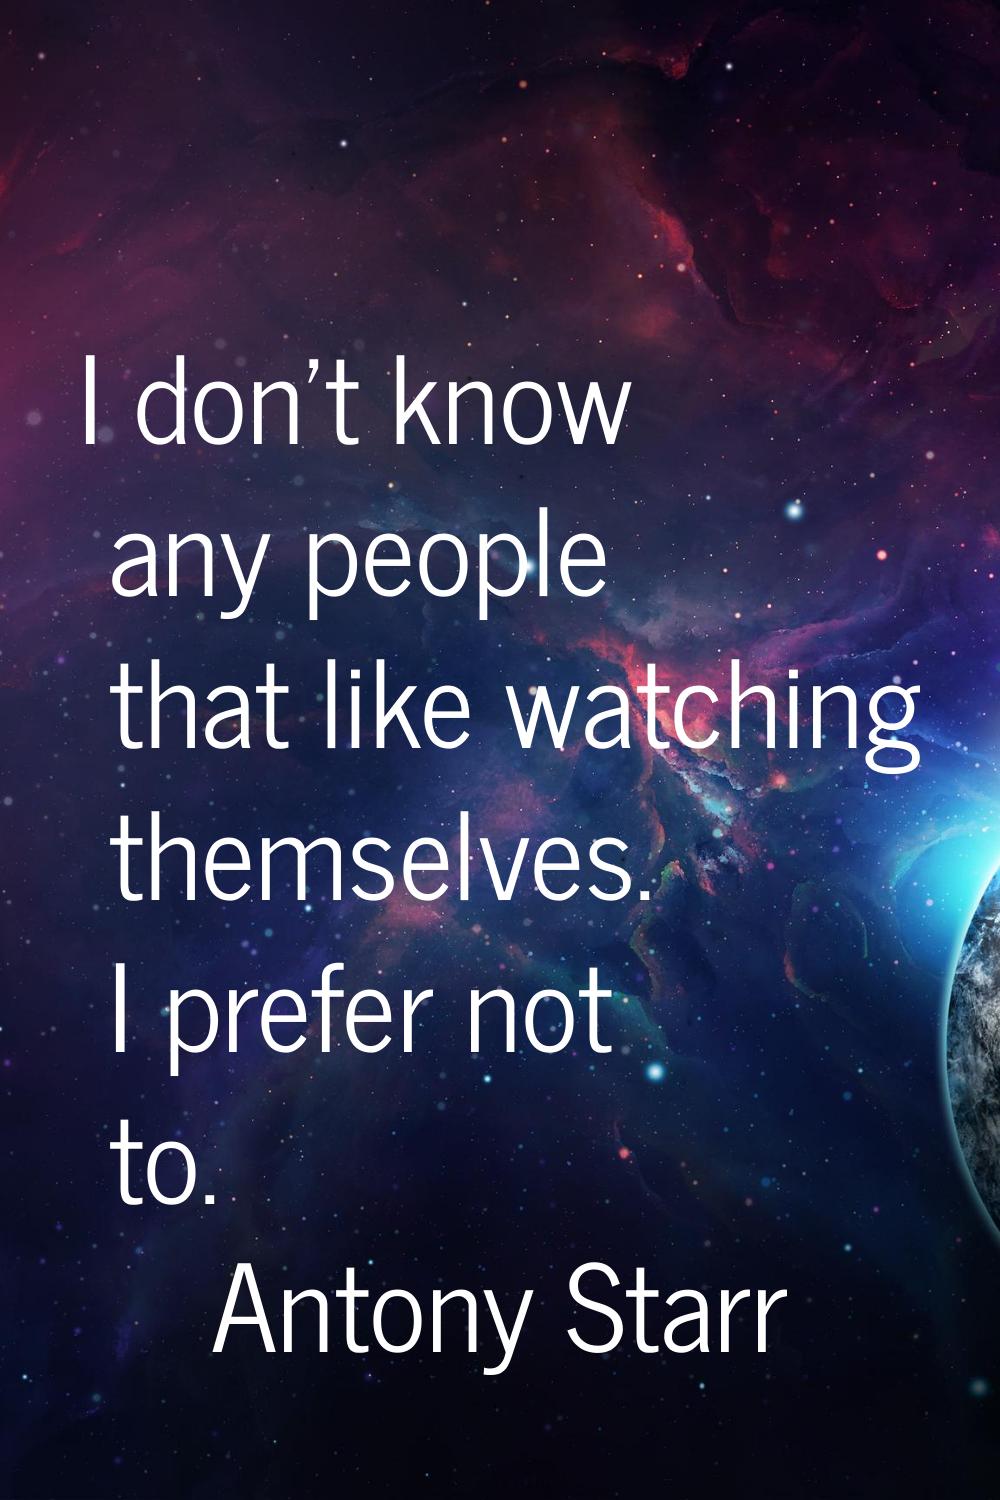 I don't know any people that like watching themselves. I prefer not to.